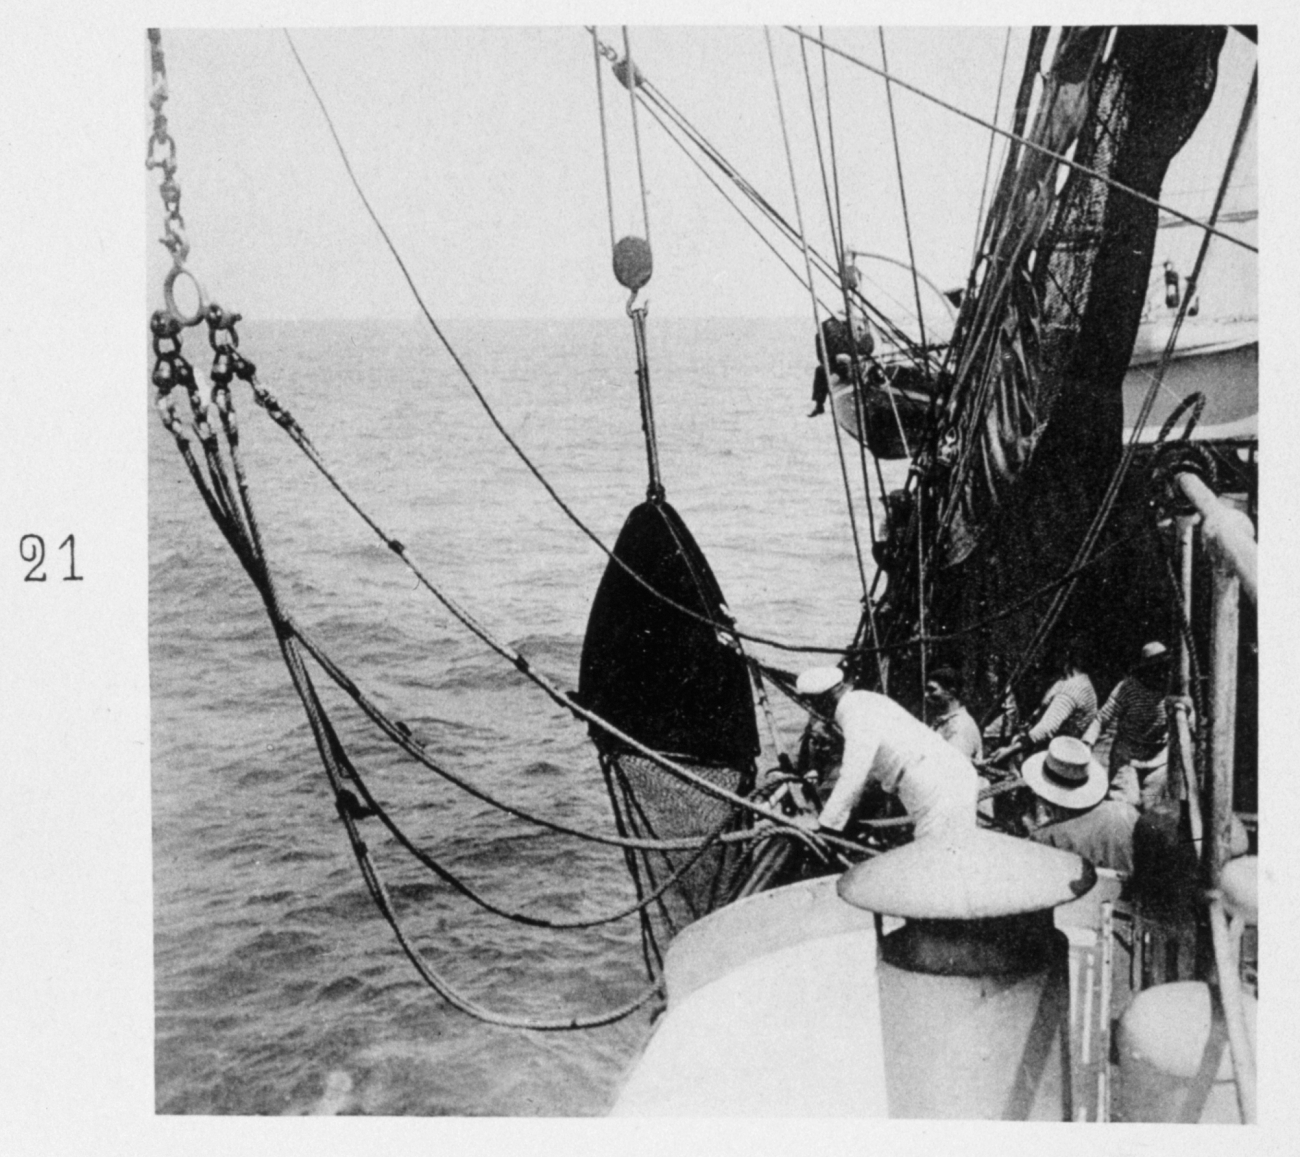 Large net with four doors meant for exploring the bathypelagic zone